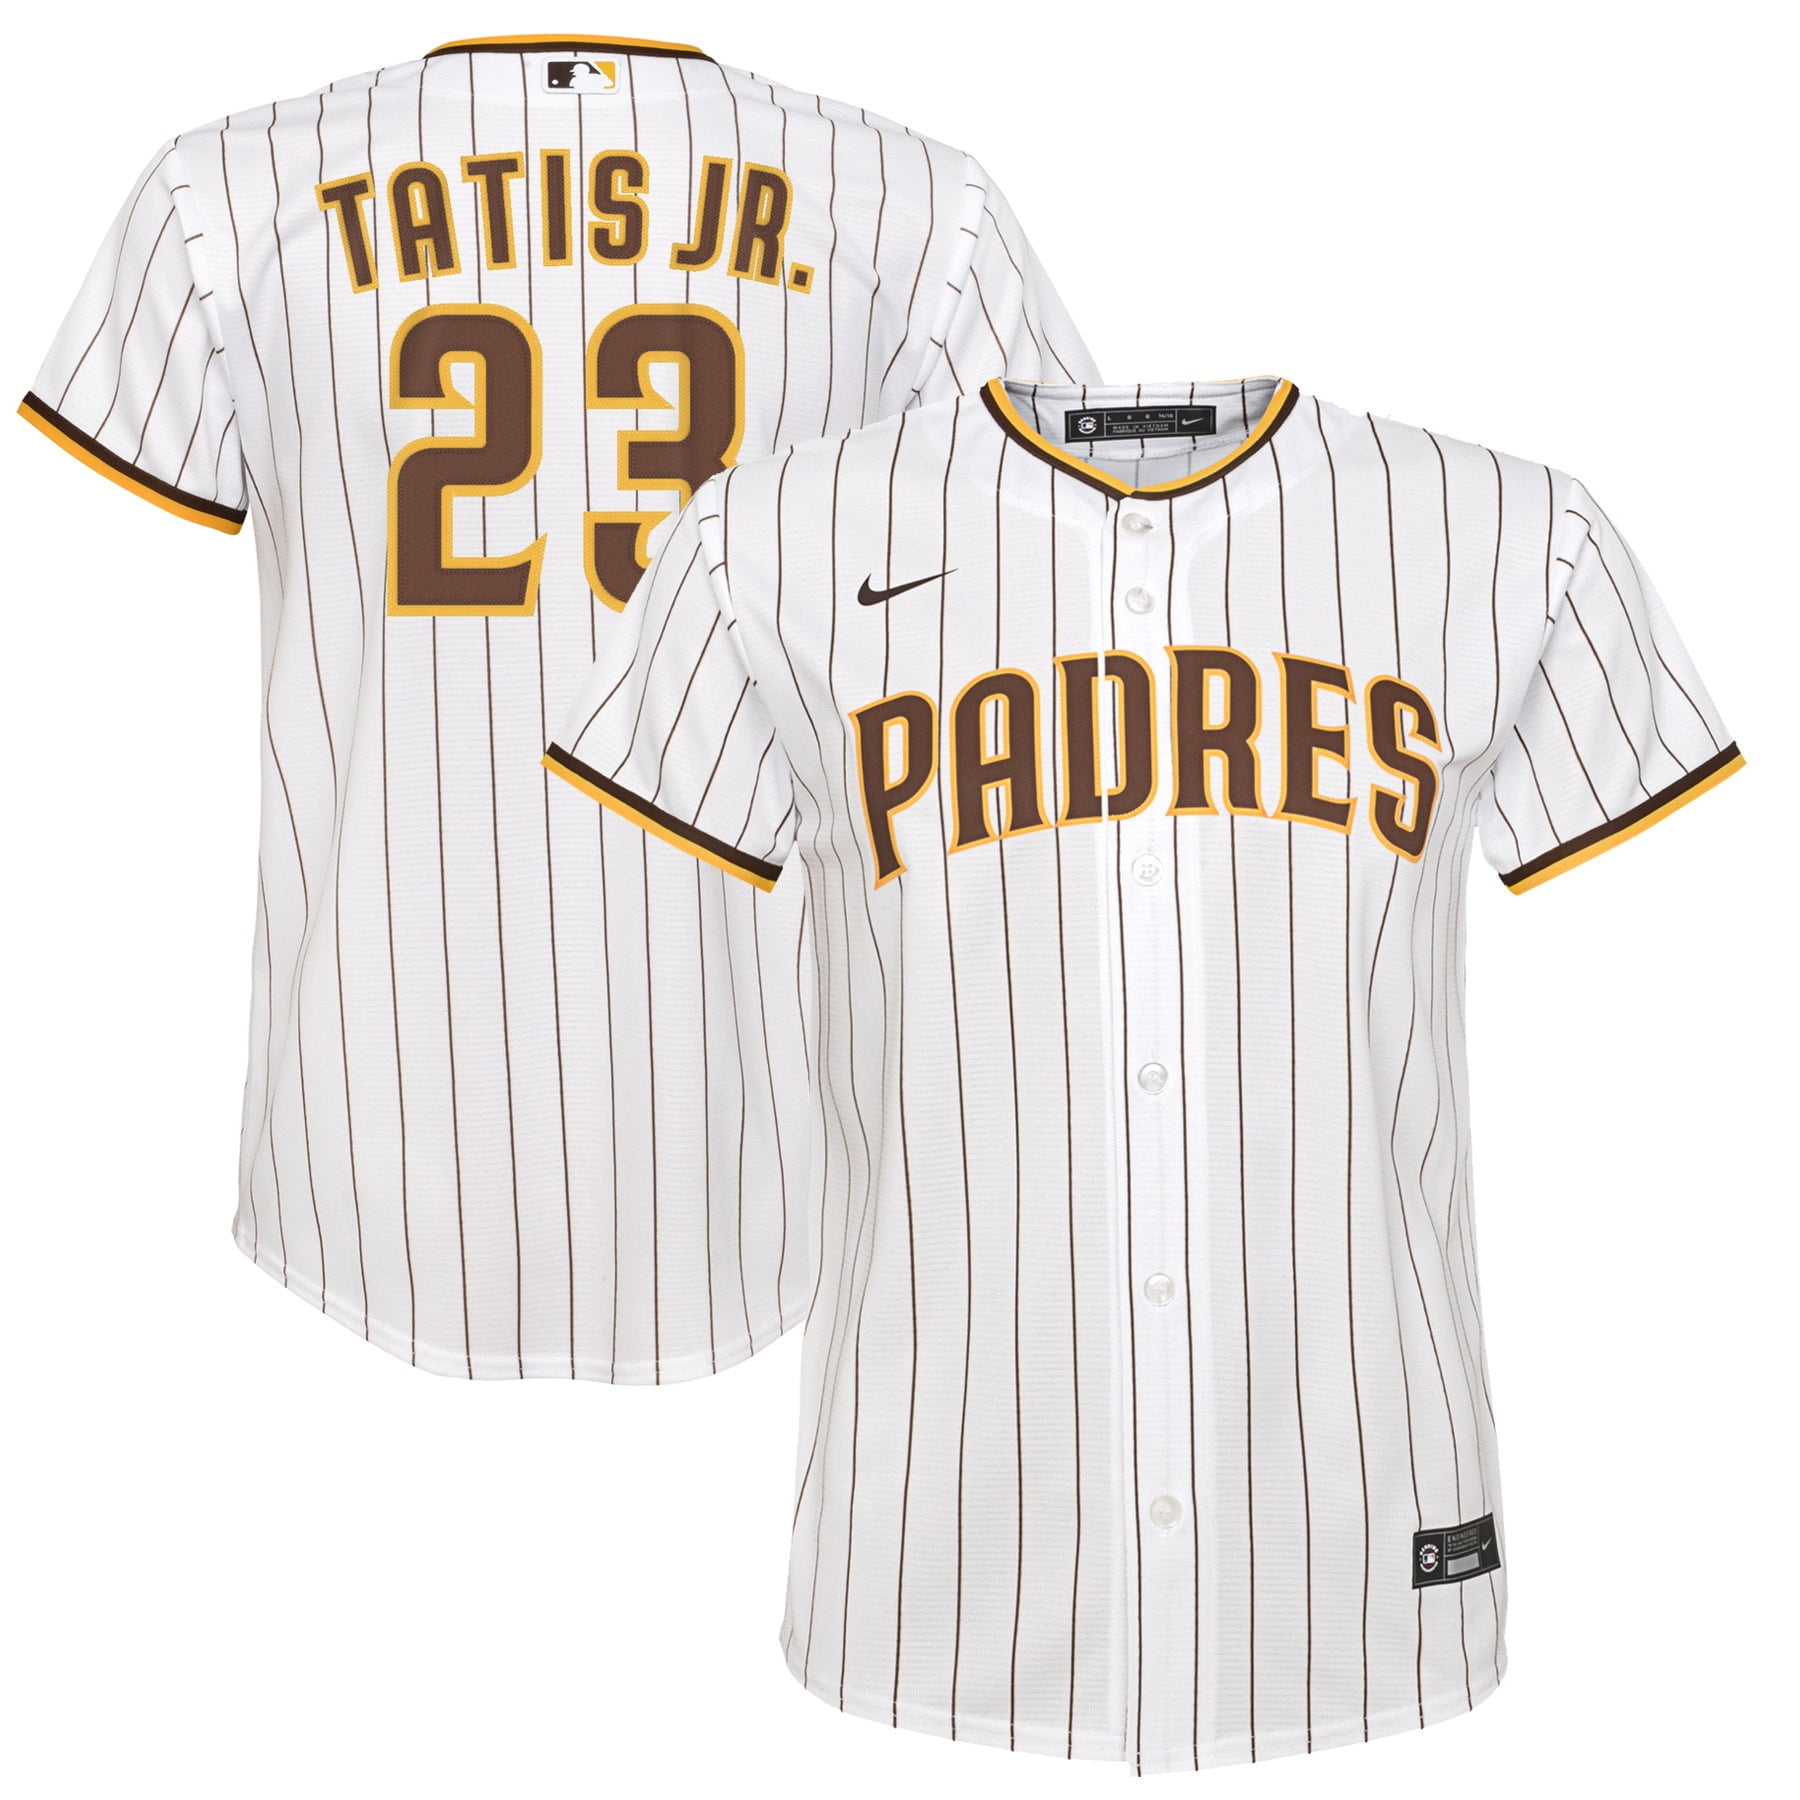 SD Padres Party Supplies SD Padres Party Topper Fernando Tatis Jr Cake Topper Fernando Tatis Jr Tatis Banner SD Padres Birthday